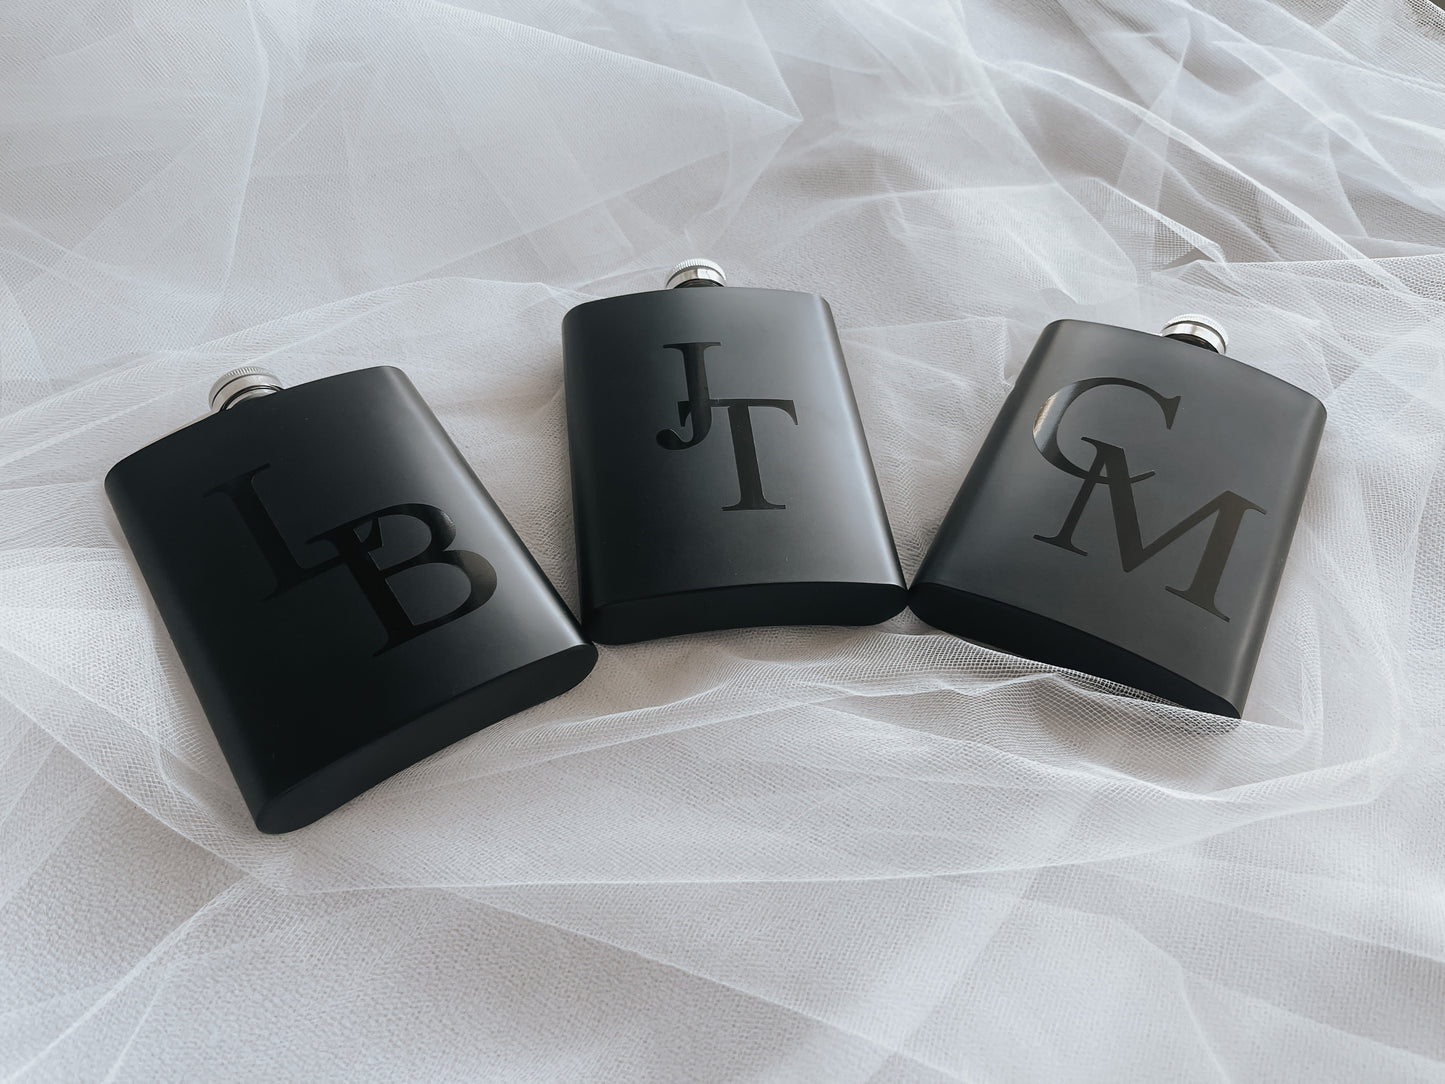 Personalized Flask